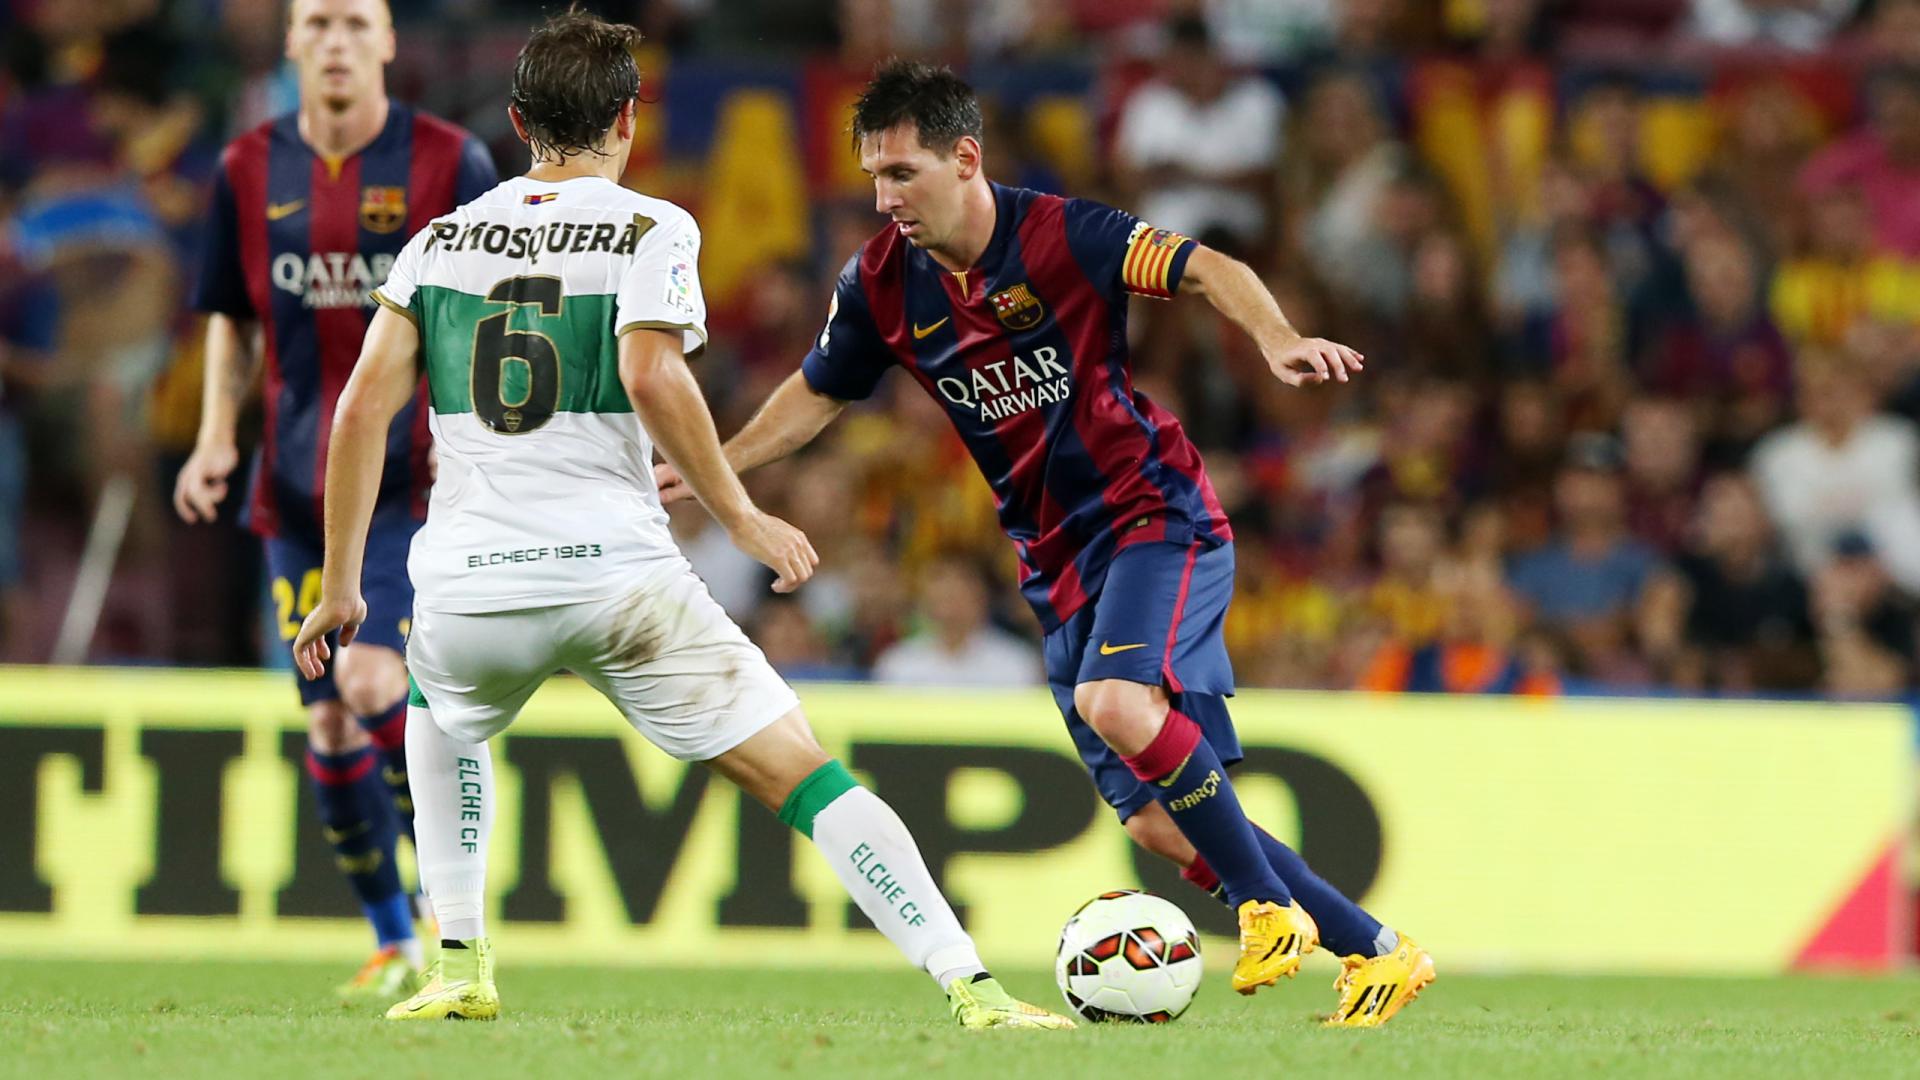 Previous meetings with Elche, LaLiga's newest team